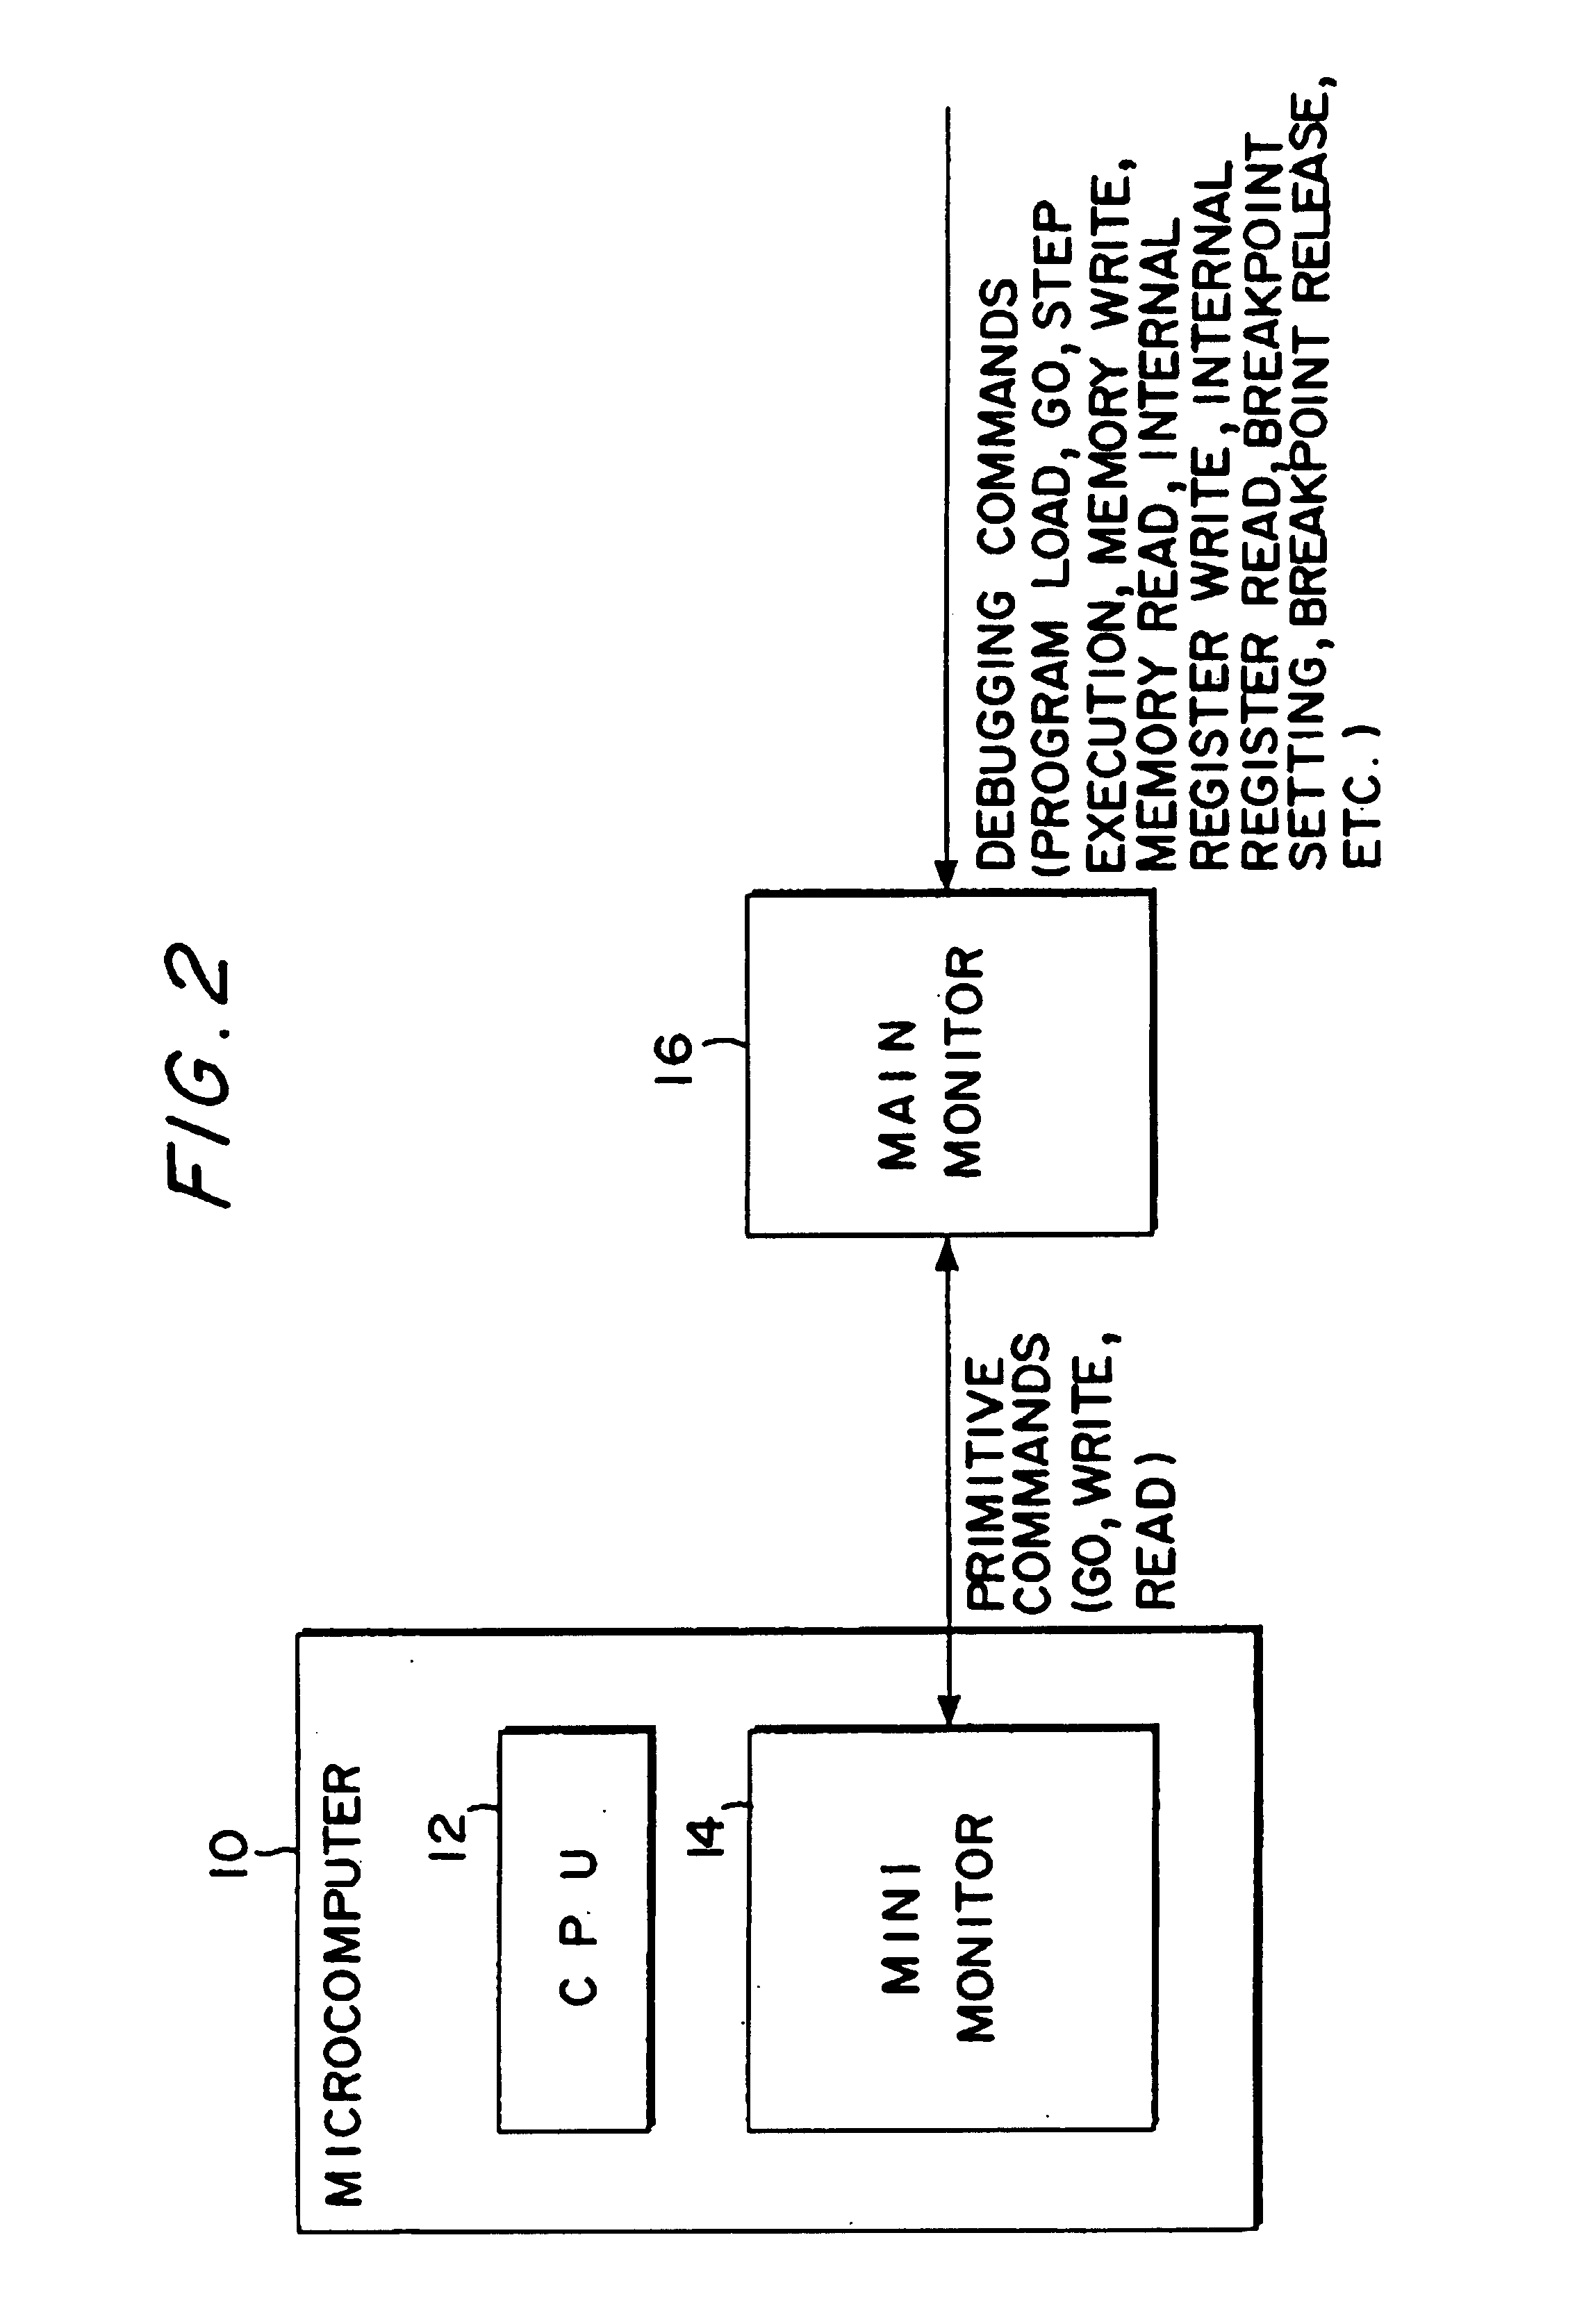 Microcomputer, electronic equipment and debugging system